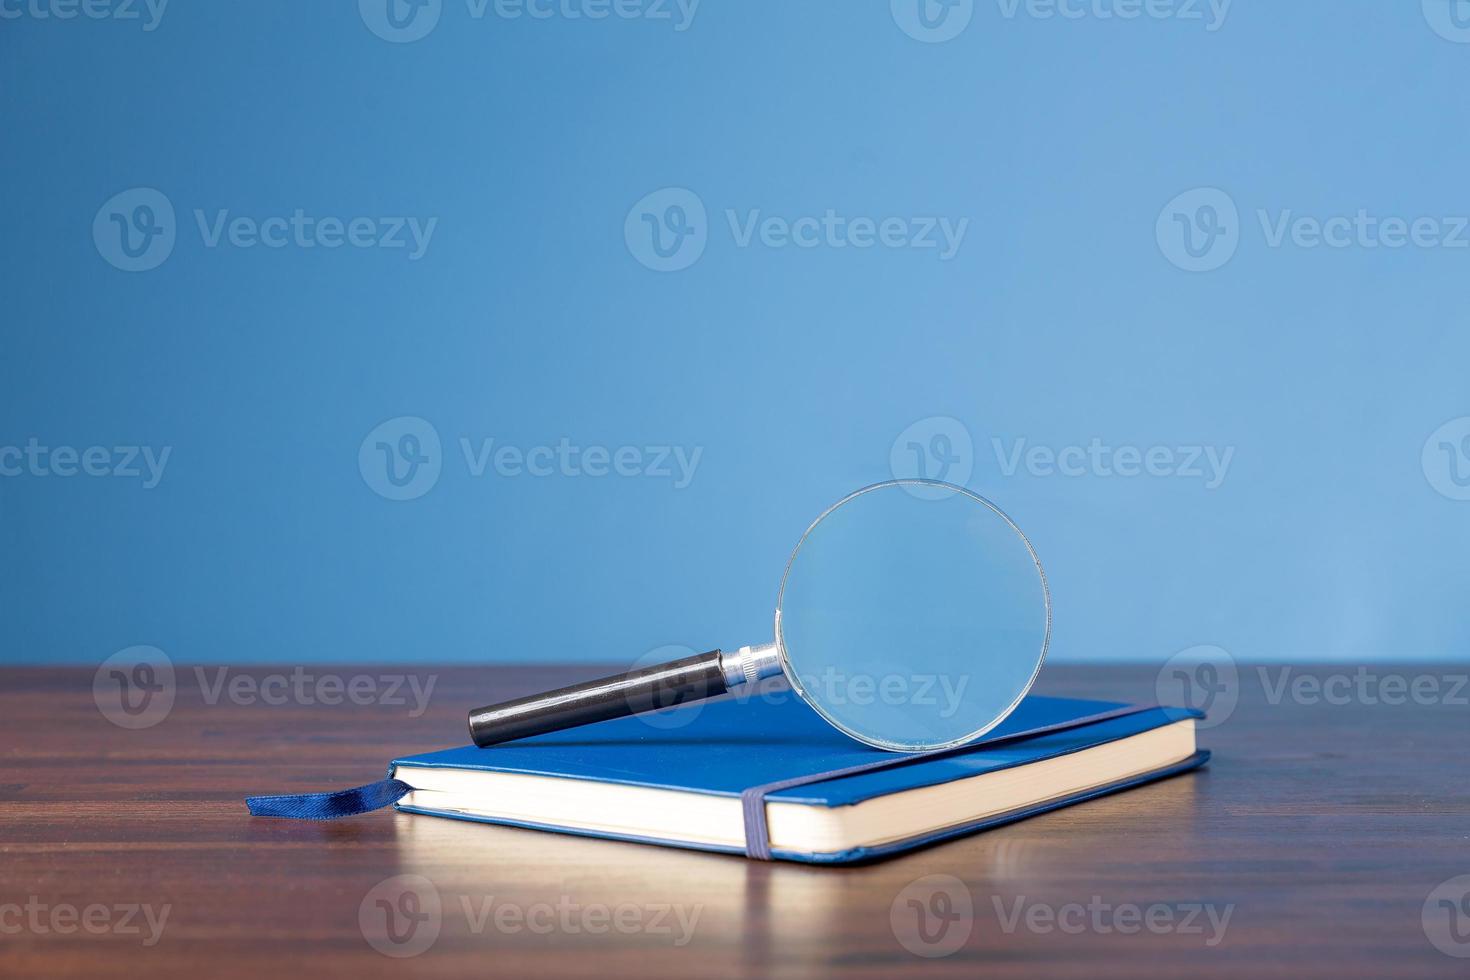 Not book with magnifying glass on wooden desk in information library of school or university, concept for education, reading , study, copy space and blue background. photo